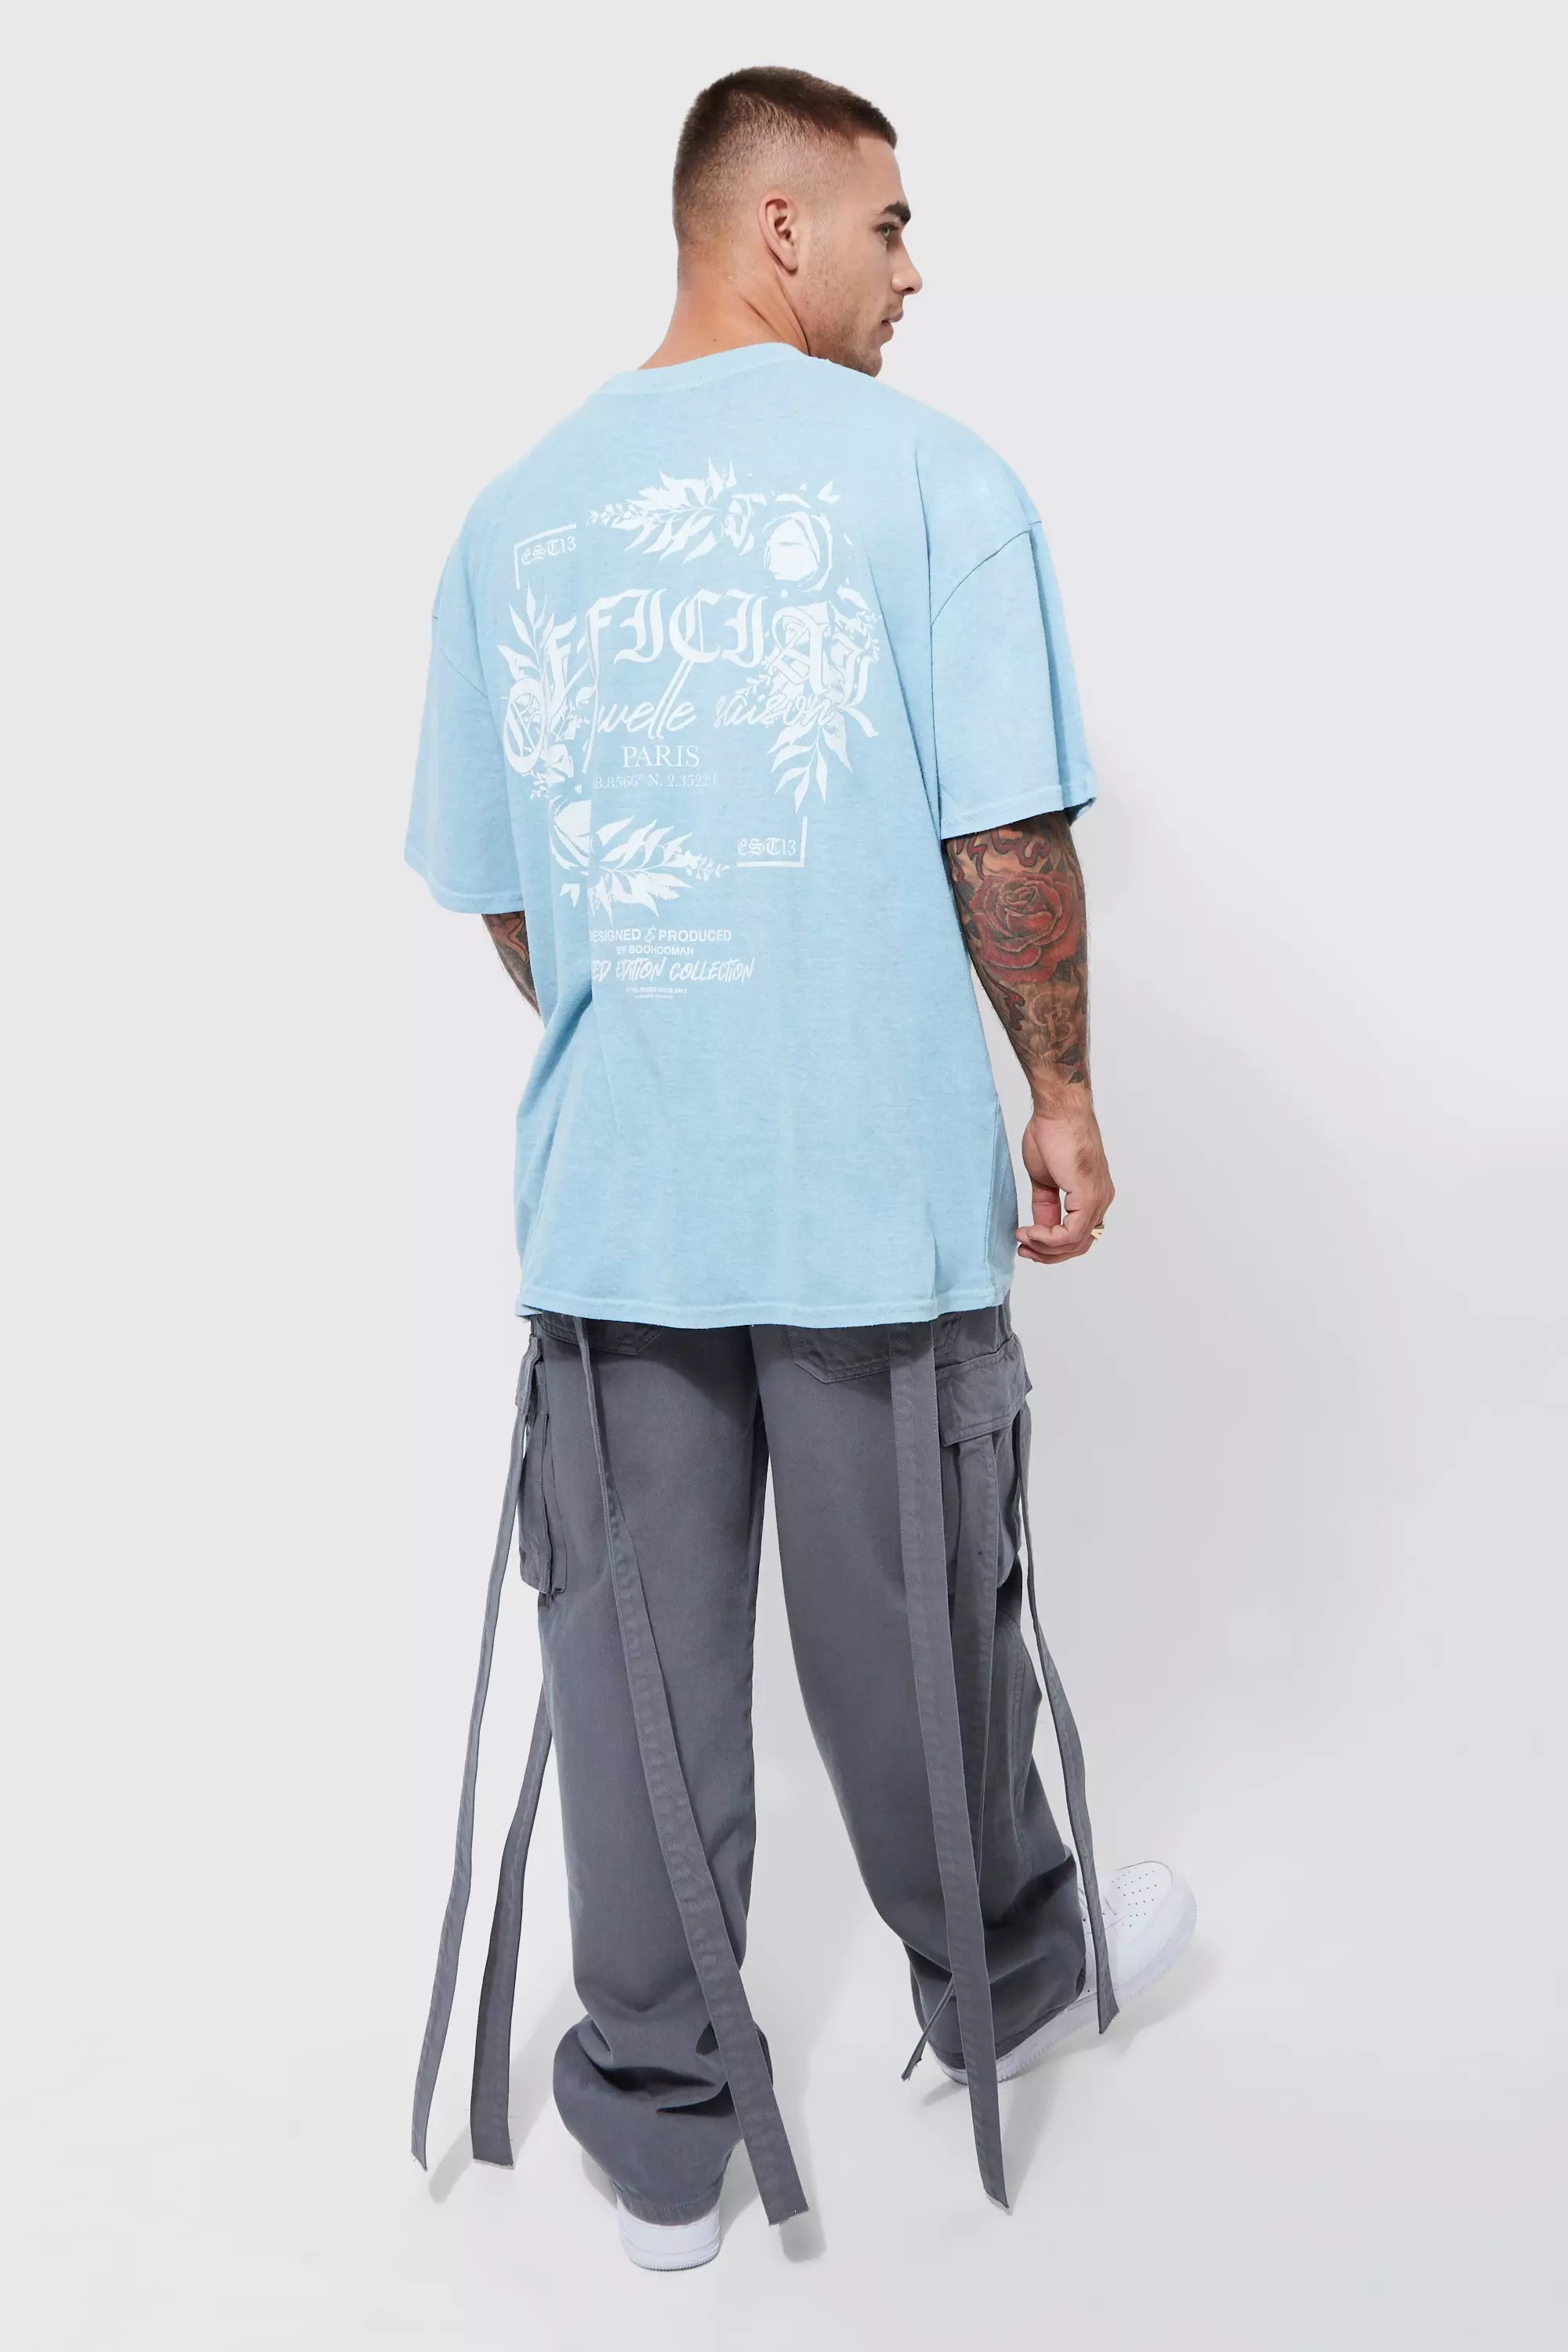 FB Oversized Graphic Tees (Blue) — Future Bounce